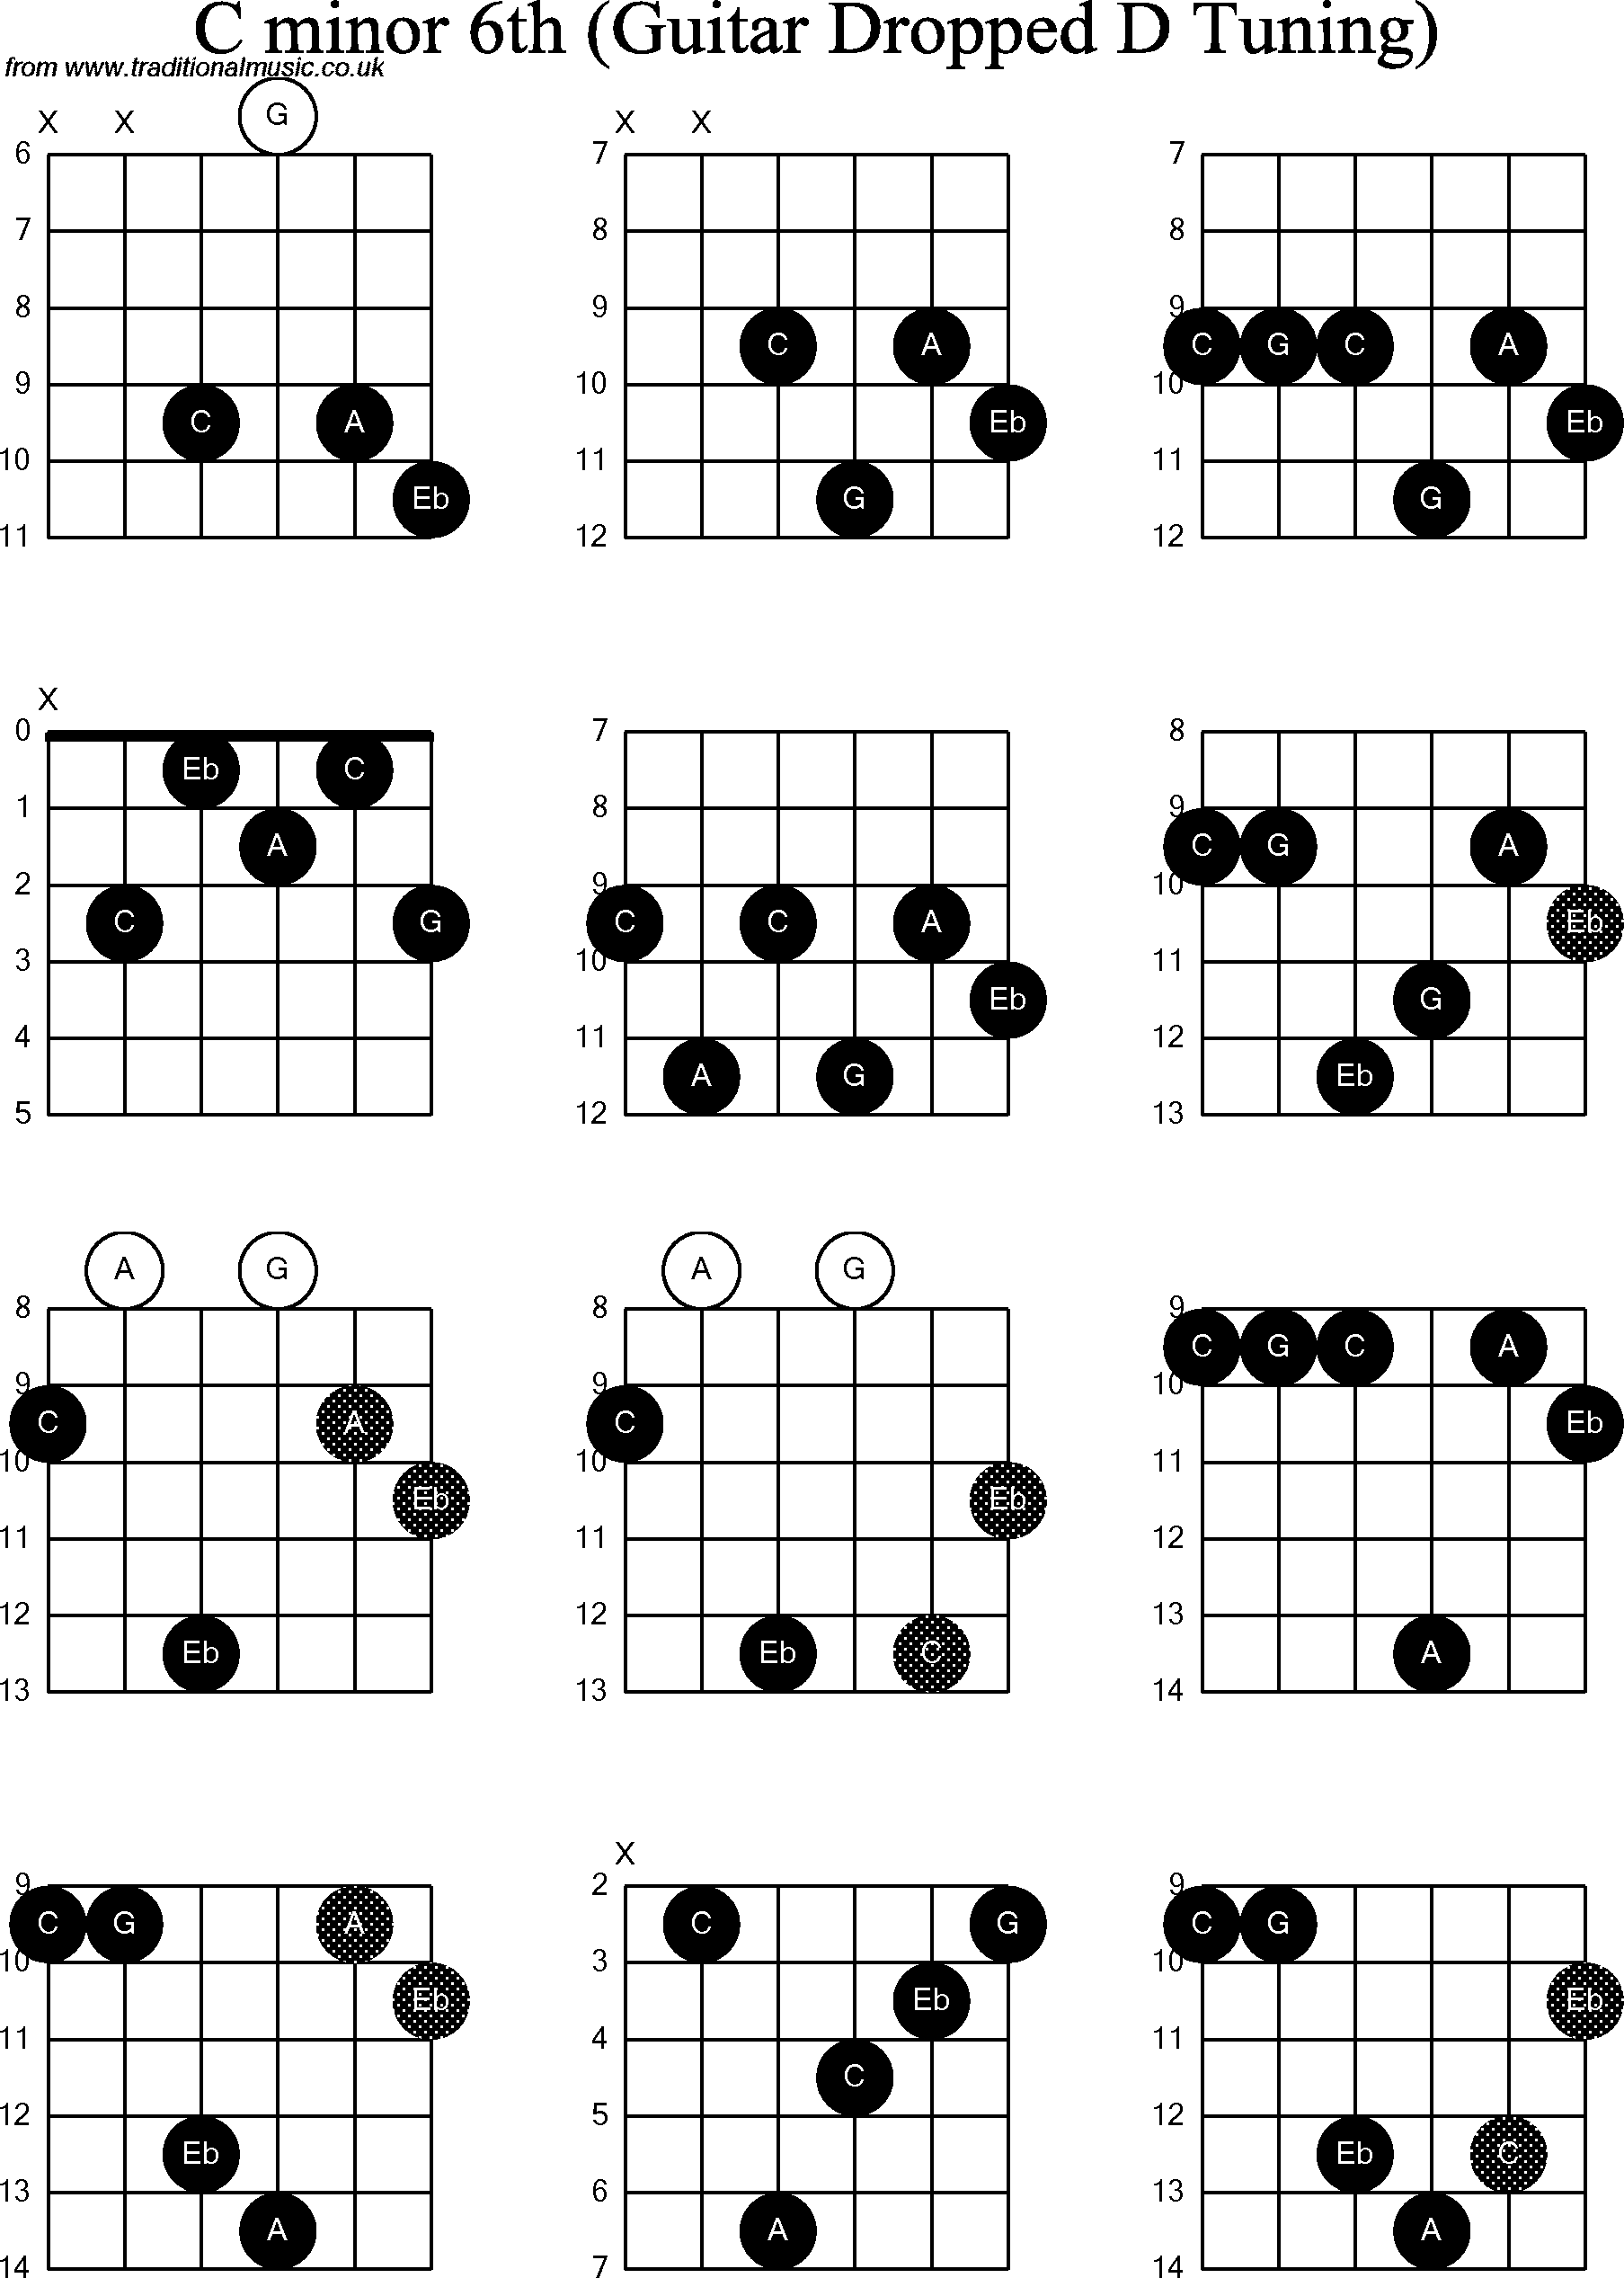 Chord diagrams for dropped D Guitar(DADGBE), C Minor6th